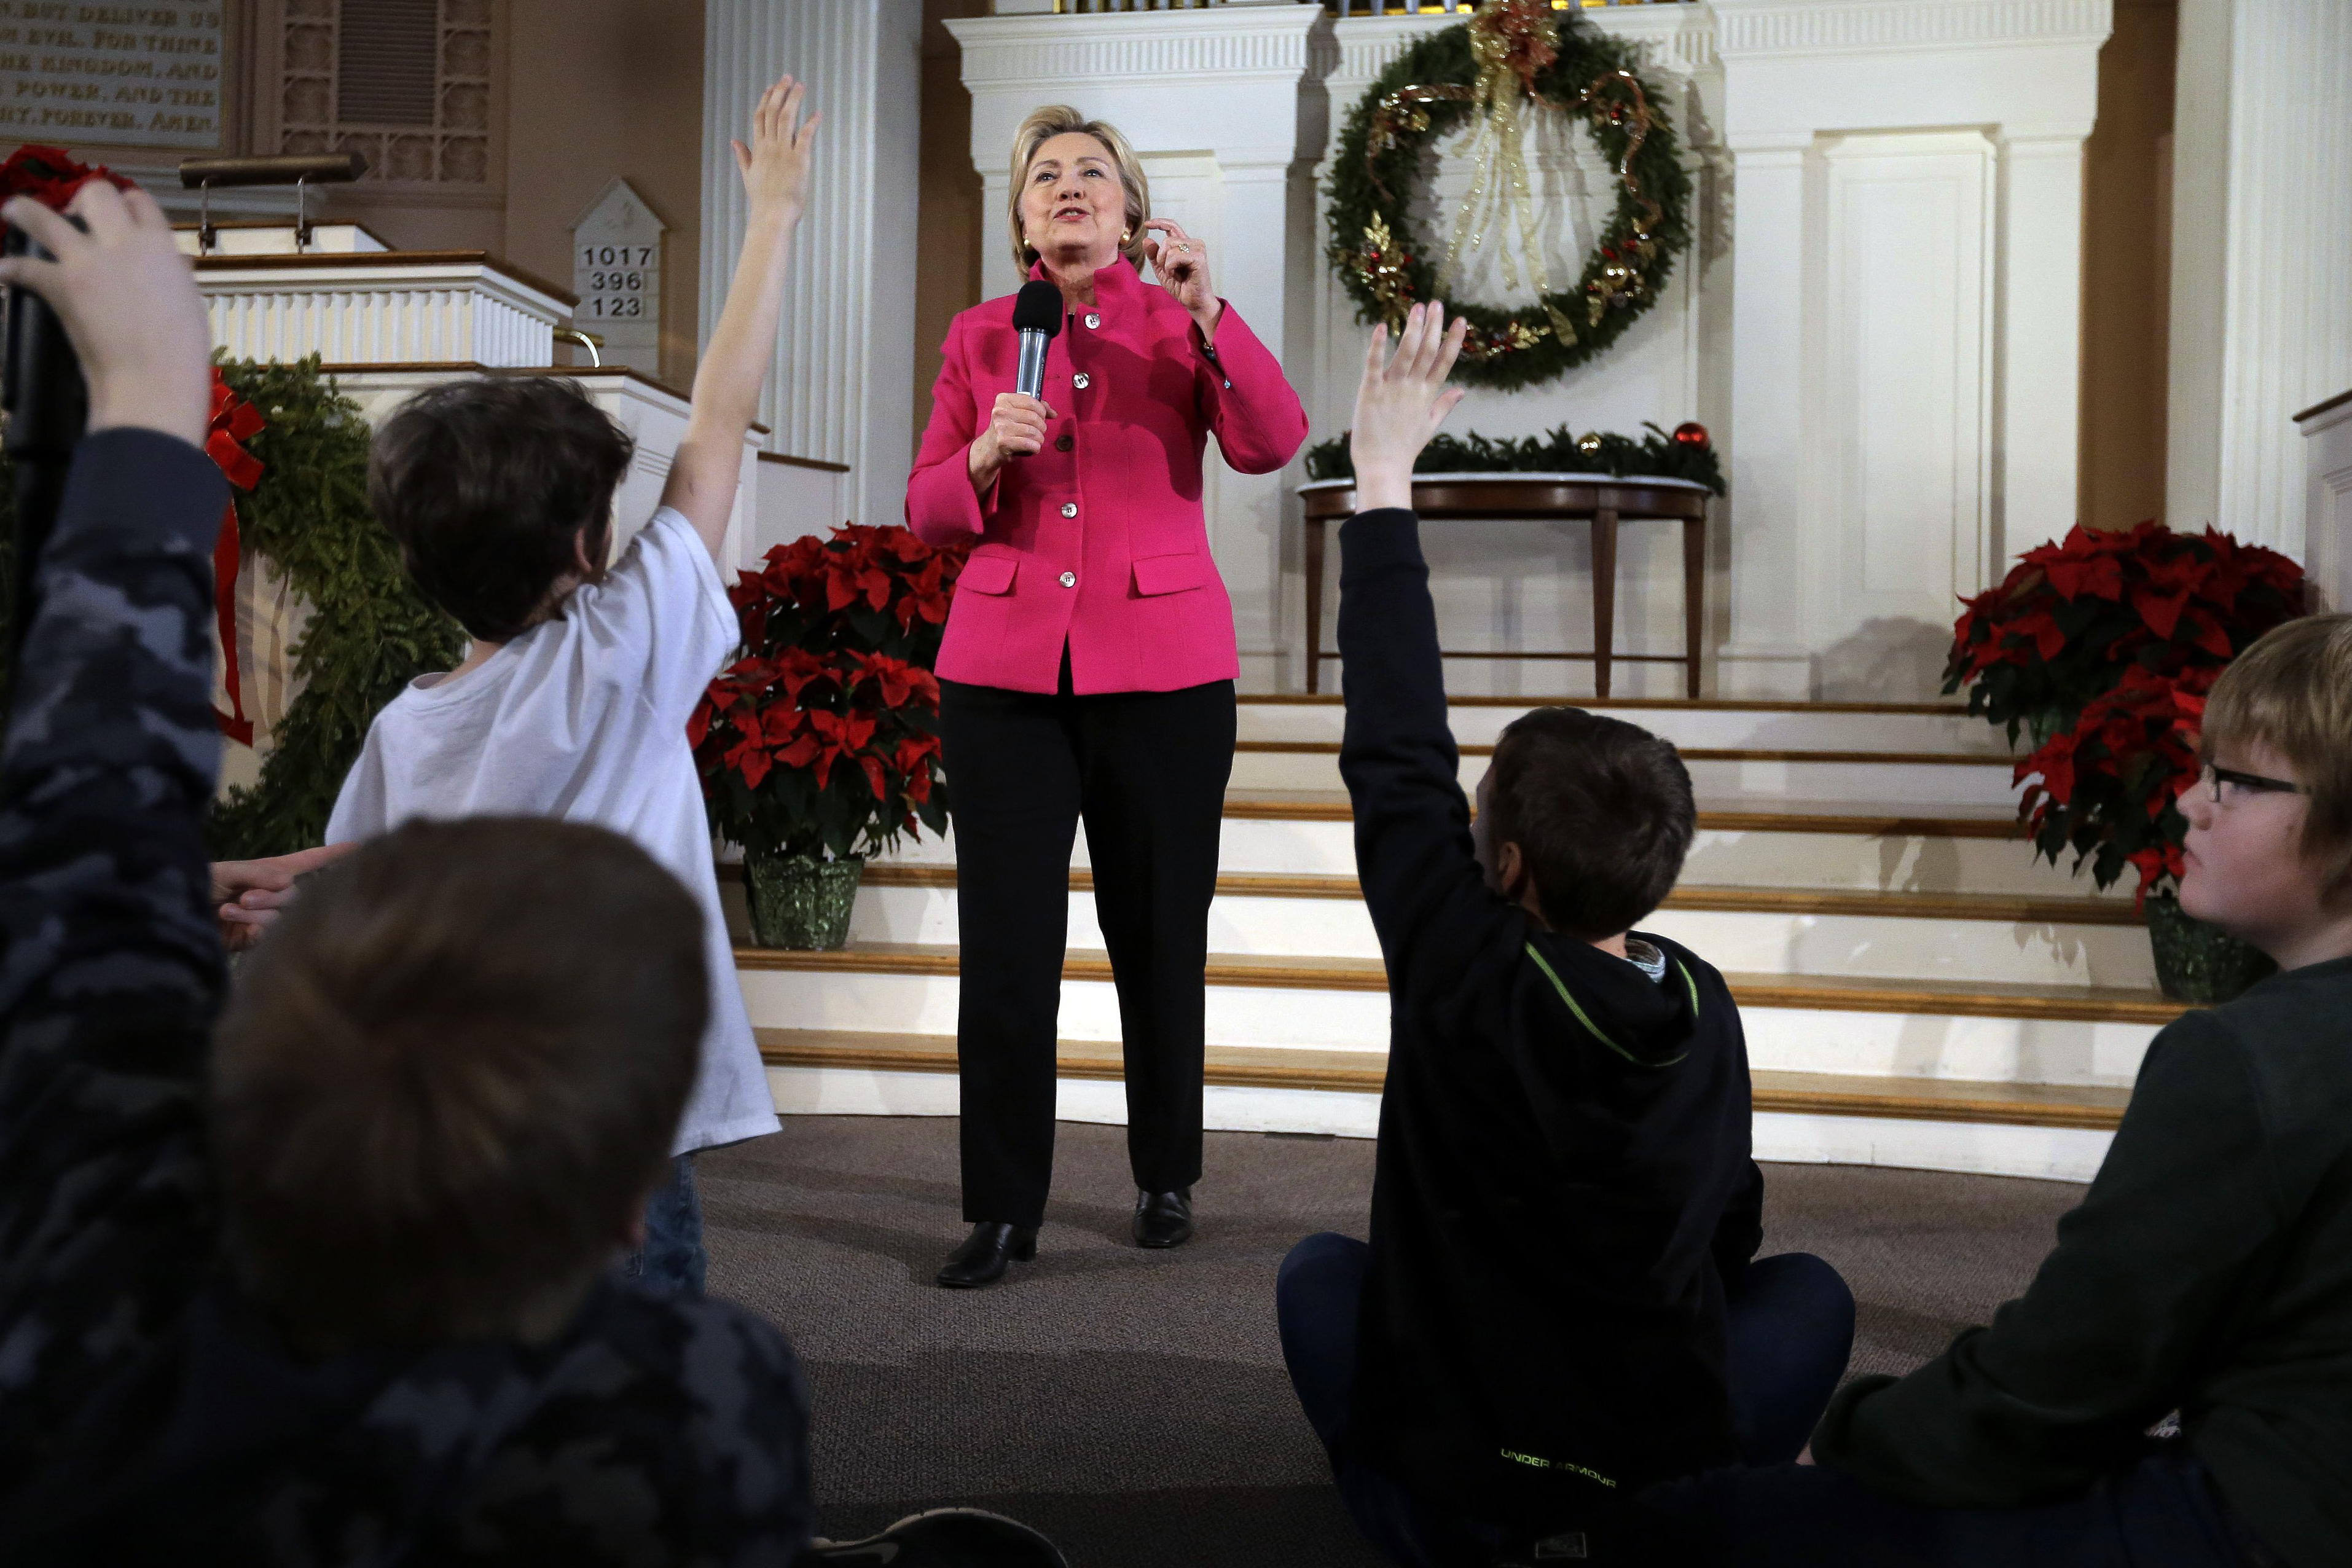 Democratic presidential candidate Hillary Clinton takes questions as children raise their hands during a town hall campaign event, Tuesday, Dec. 29, 2015, at South Church in Portsmouth, N.H. (Steven Senne—AP)